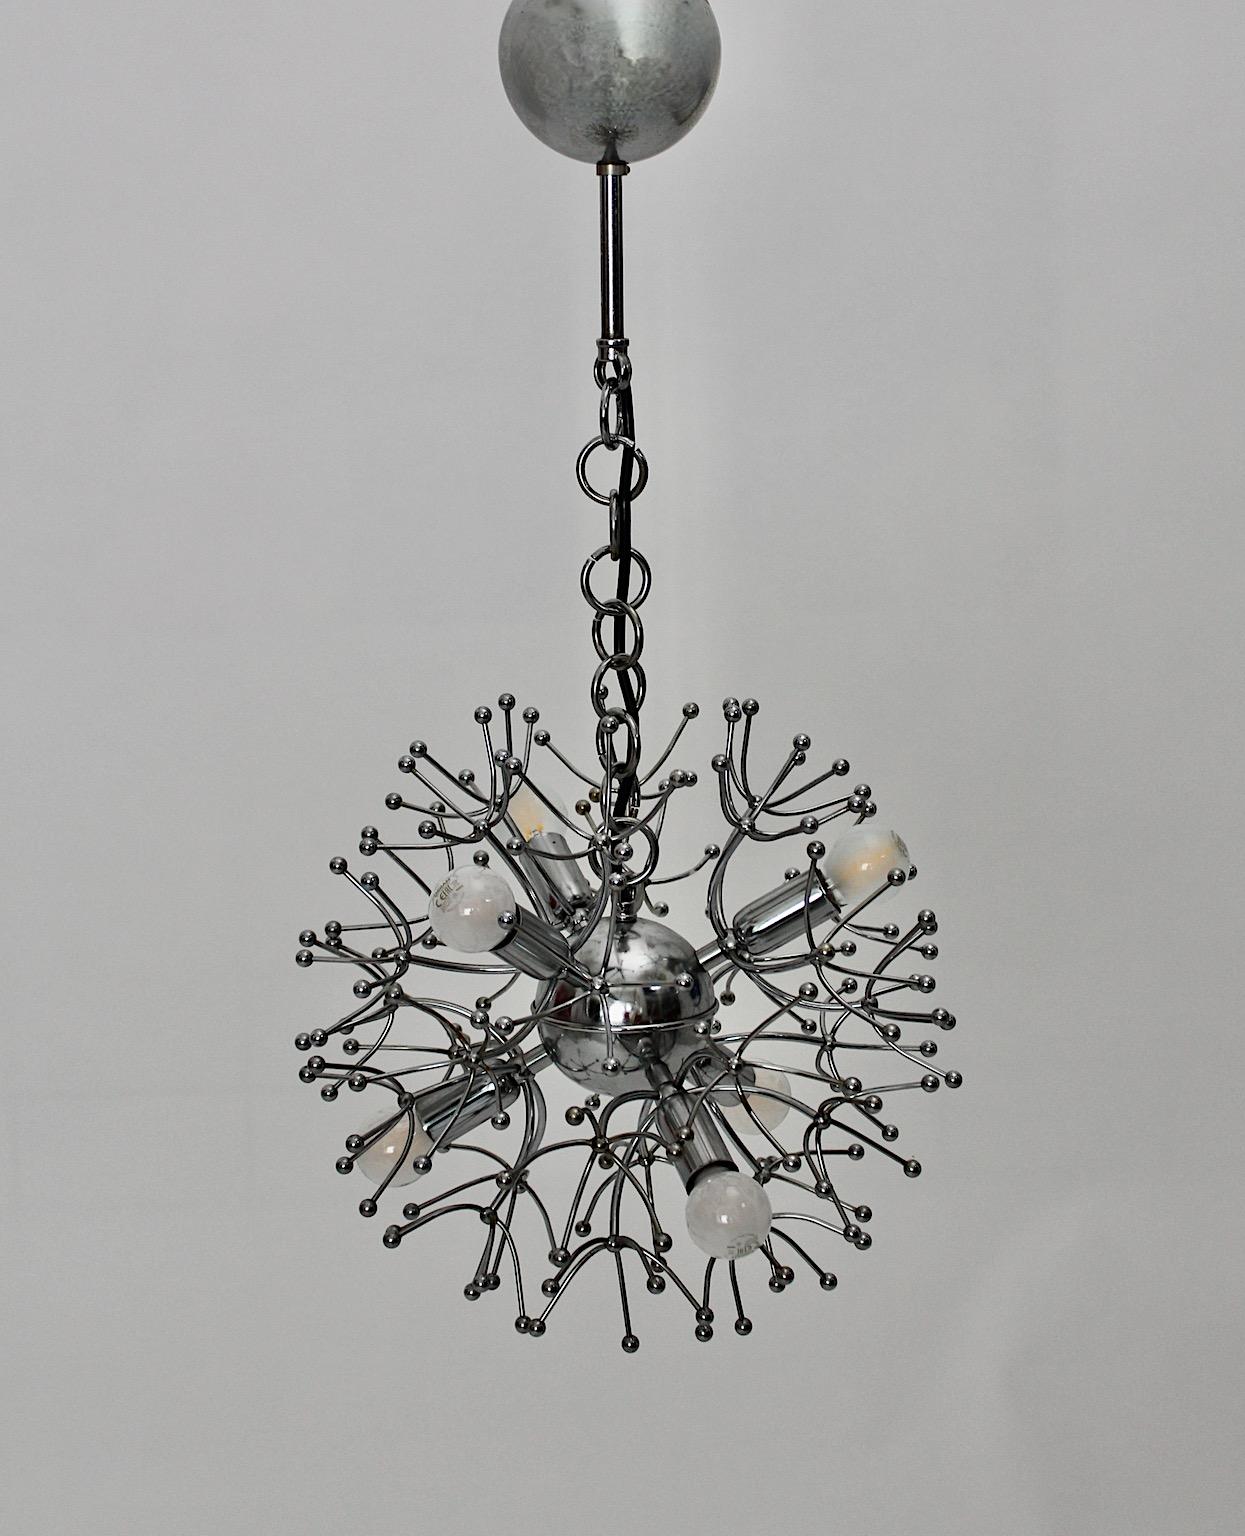 Space Age Vintage circular silver chromed sputnik shape pendant or
hanging light by Gaetano Sciolari 1960s Italy.
An amazing sputnik shape circular pendant with six E 14 sockets from chrome plated metal in silver color.
This circular shaped